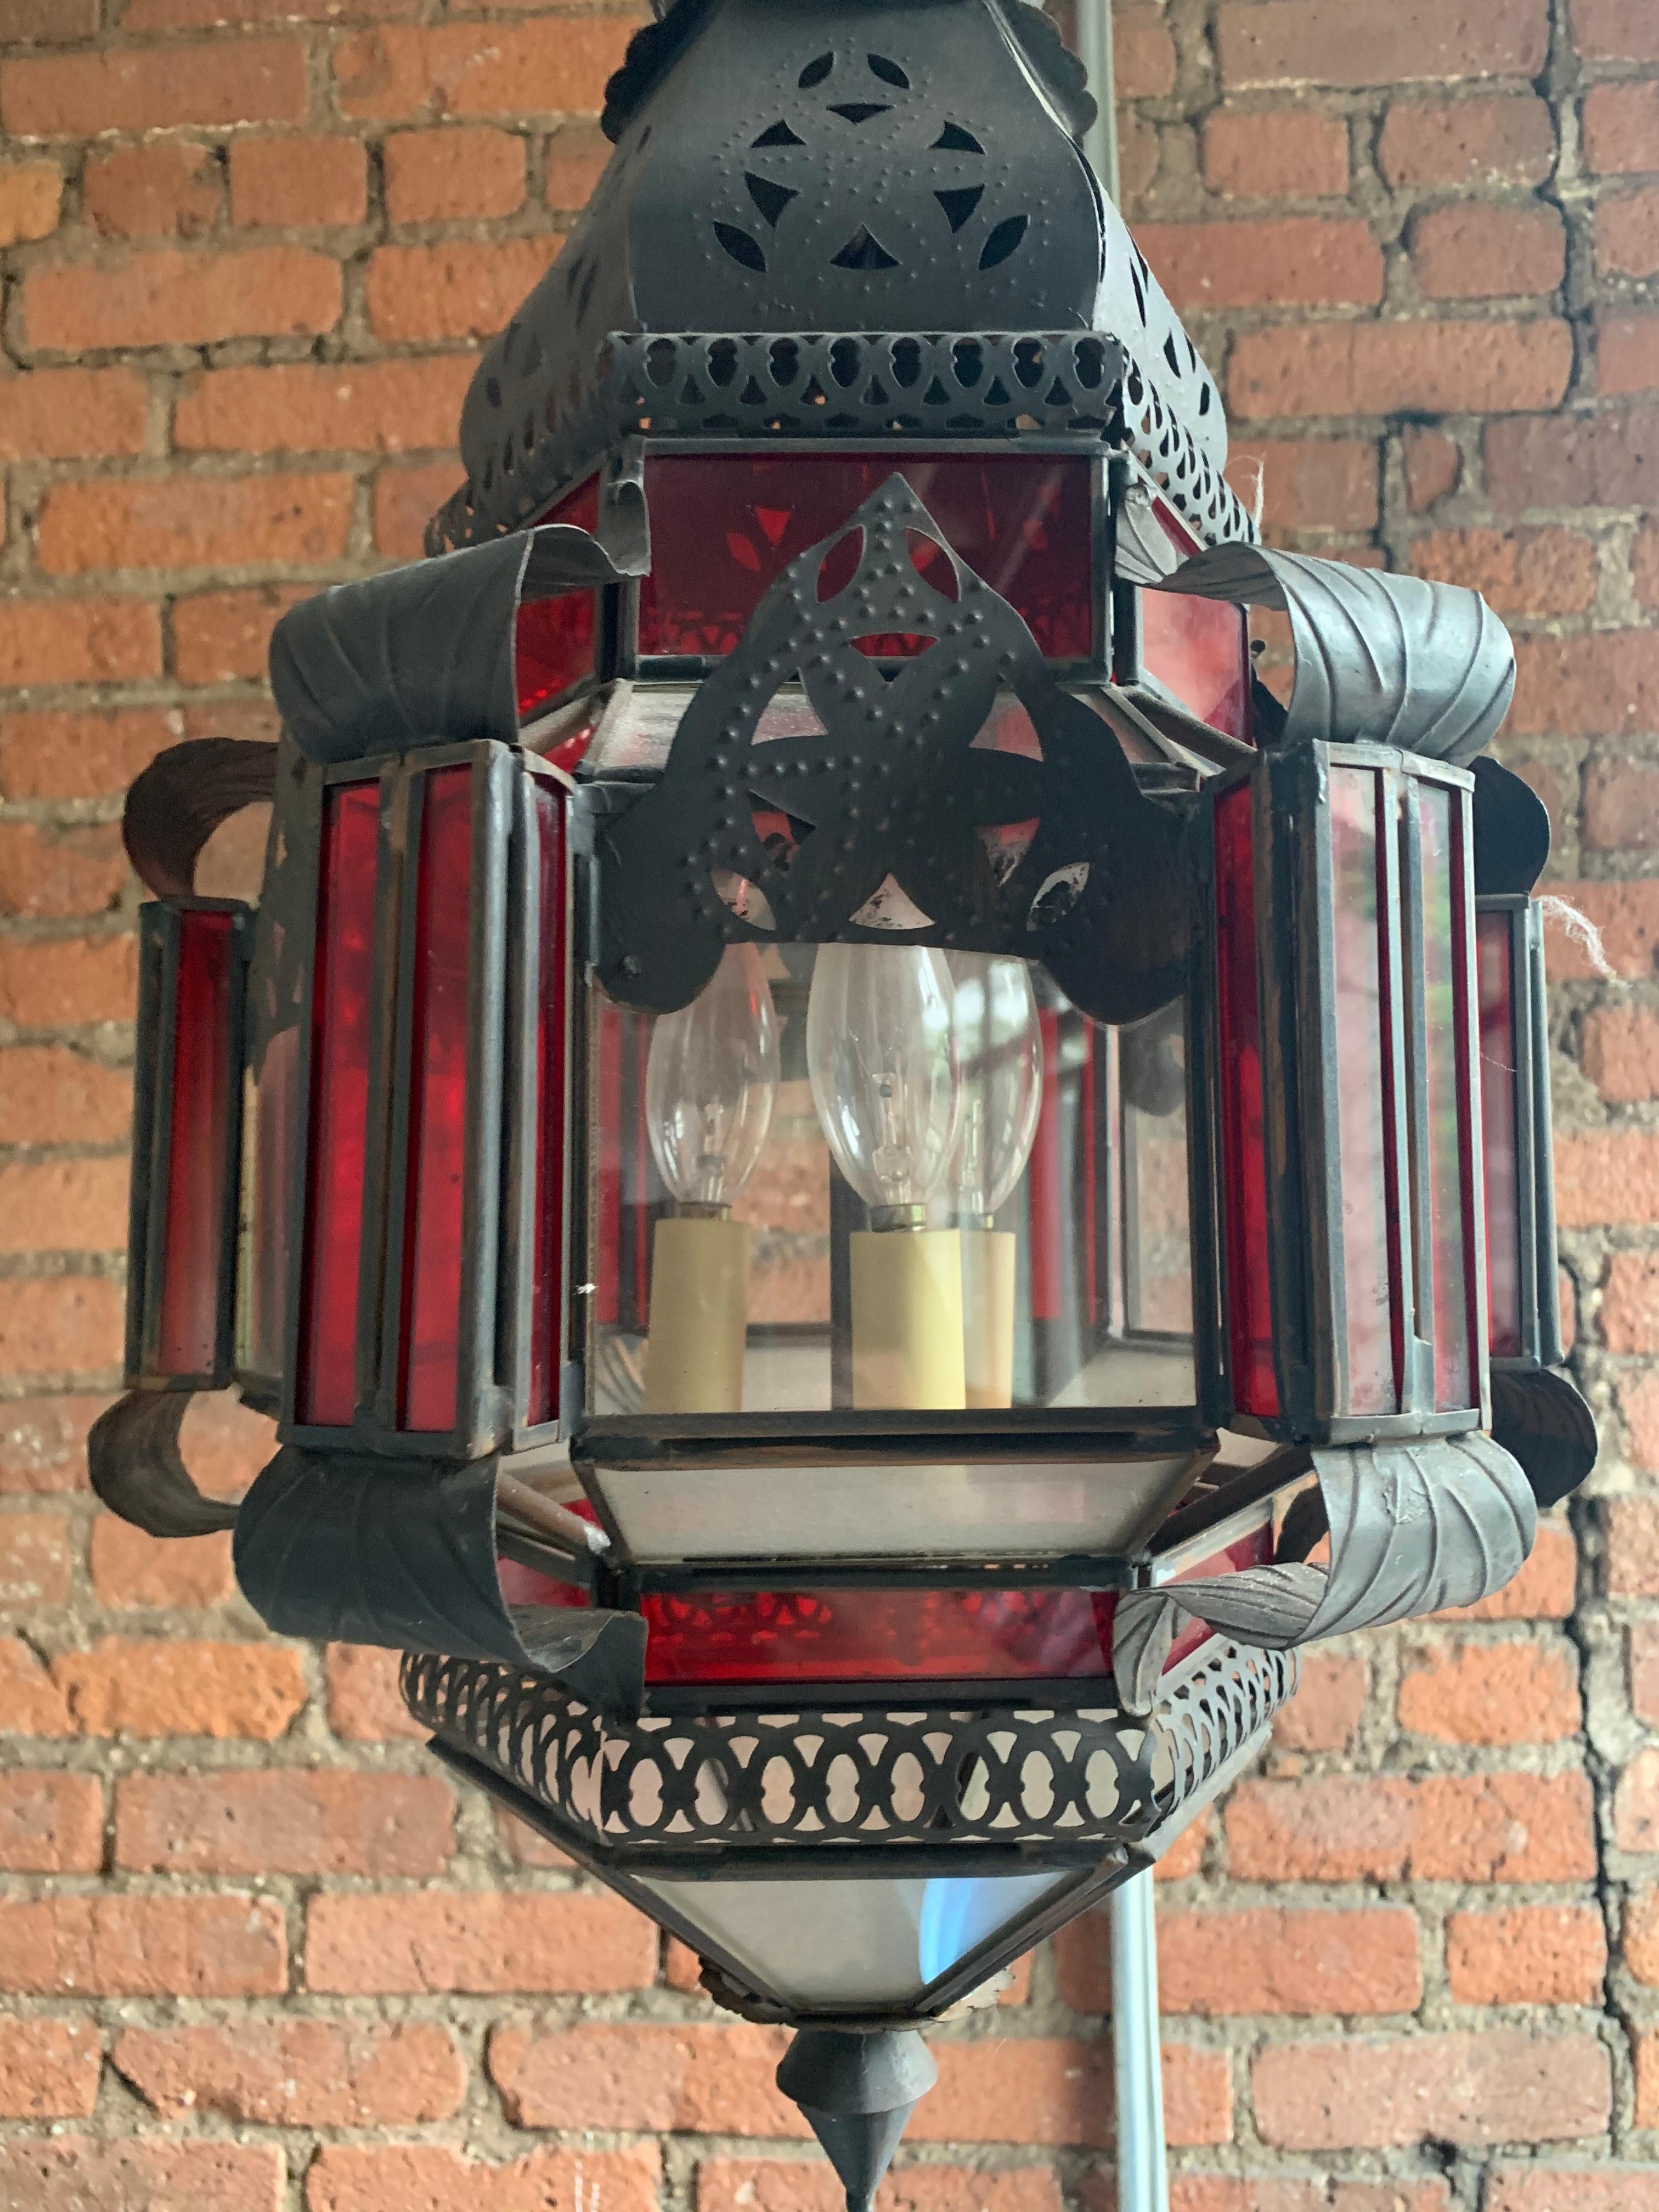 Vintage hand blown glass Moroccan light fixture. The piece has a patinated copper finish with hand blown clear and scarlet glass and pierced metal details.

Property from esteemed interior designer Juan Montoya. Juan Montoya is one of the most